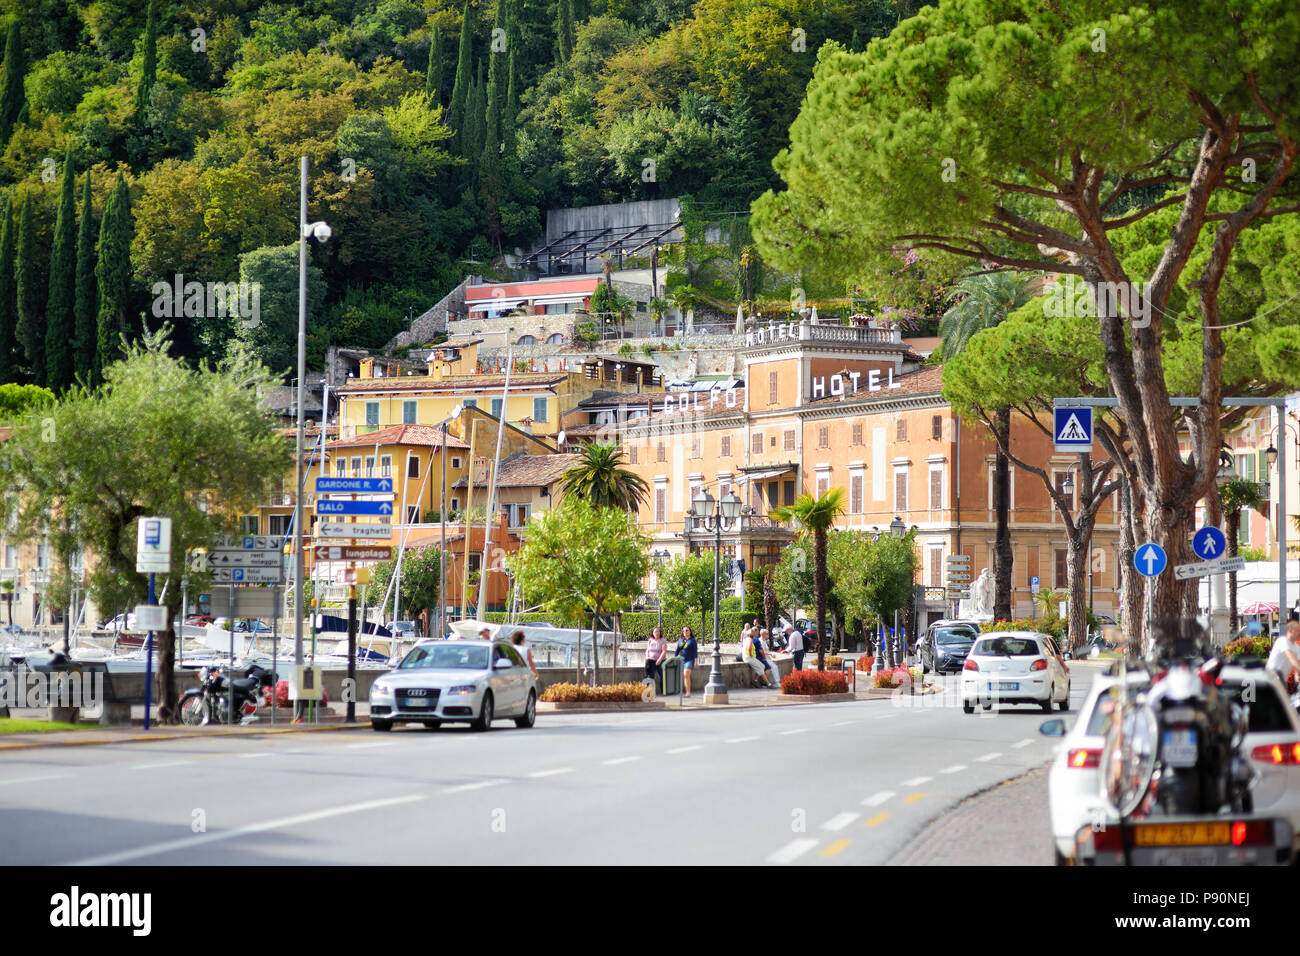 TOSCOLANO-MADERNO, ITALY - SEPTEMBER 18, 2016: Beautiful views of Toscolano-Maderno, a town and comune on the West coast of Lake Garda, in the provinc Stock Photo